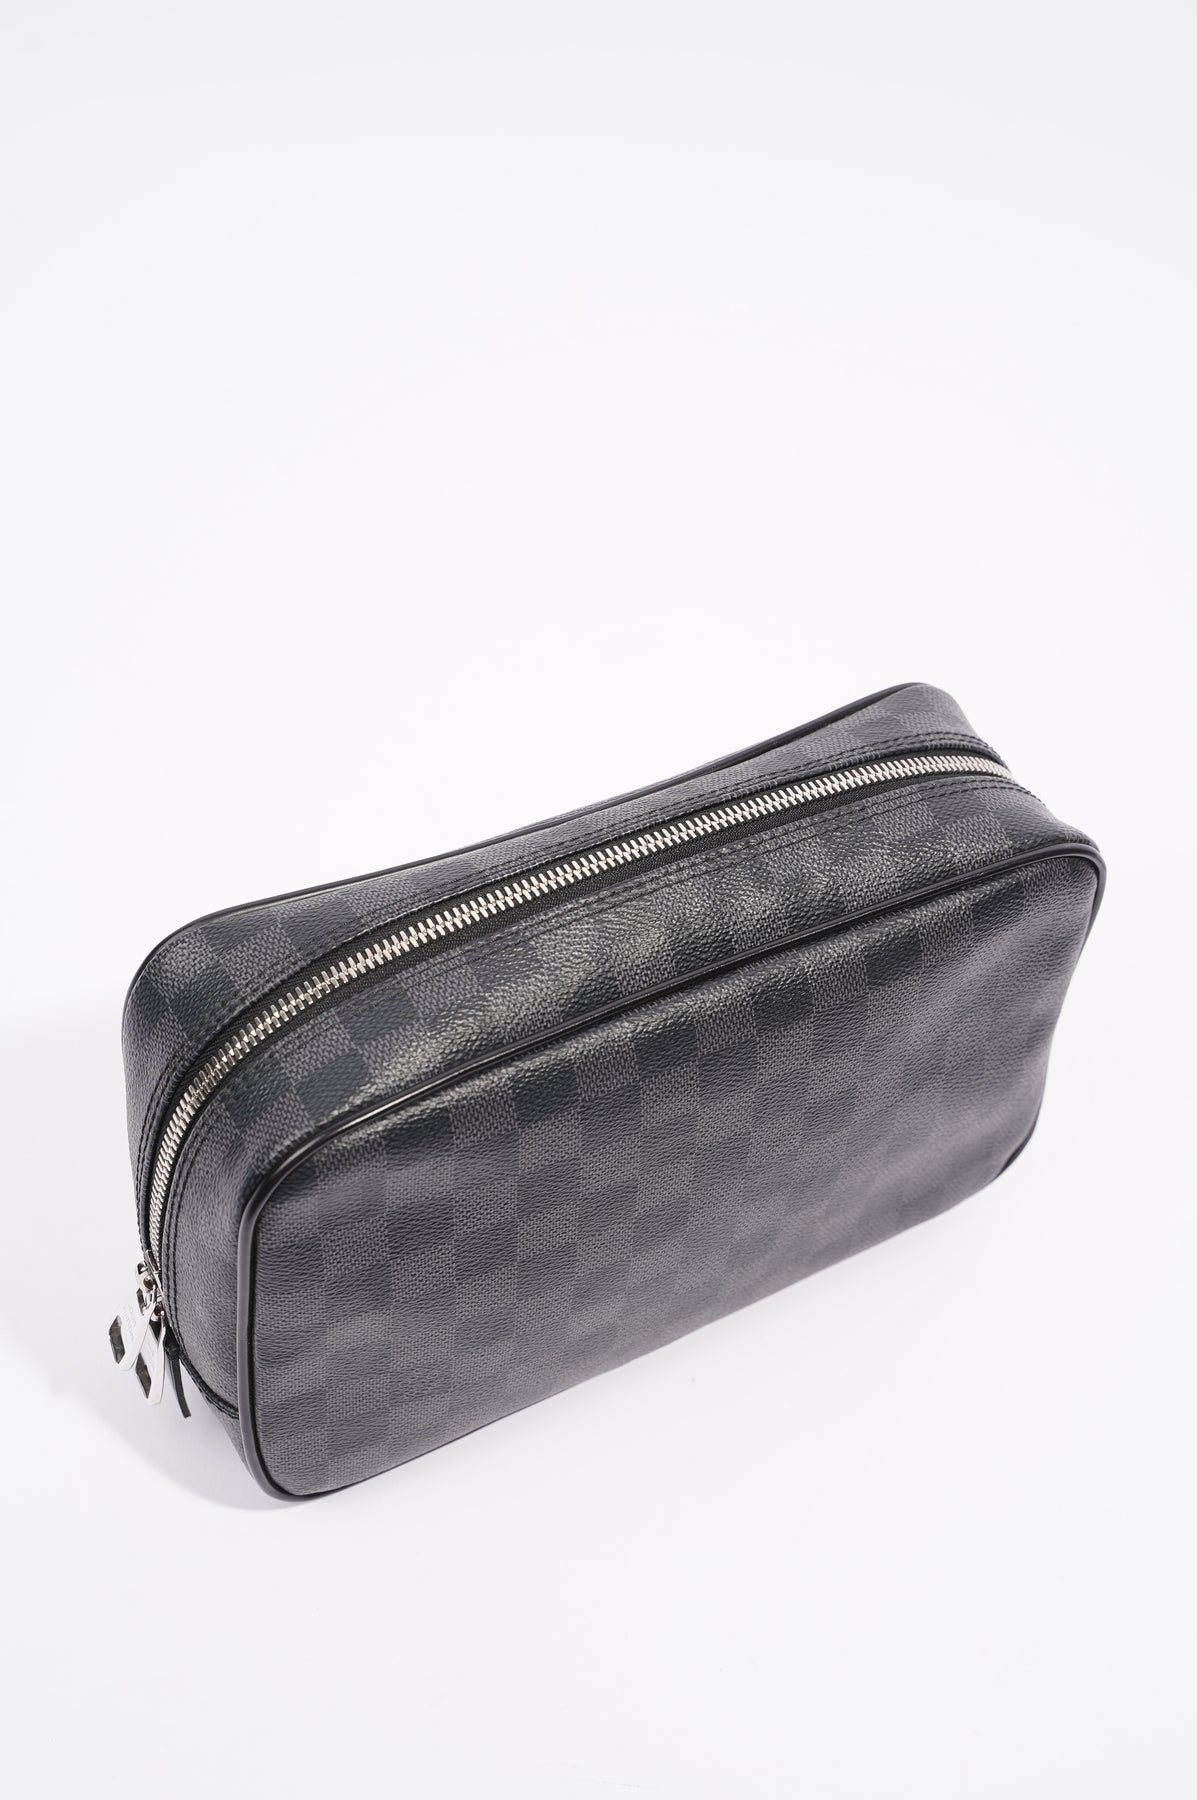 Shop Louis Vuitton DAMIER GRAPHITE 2021 SS Toiletry Pouch (N47625) by  nordsud